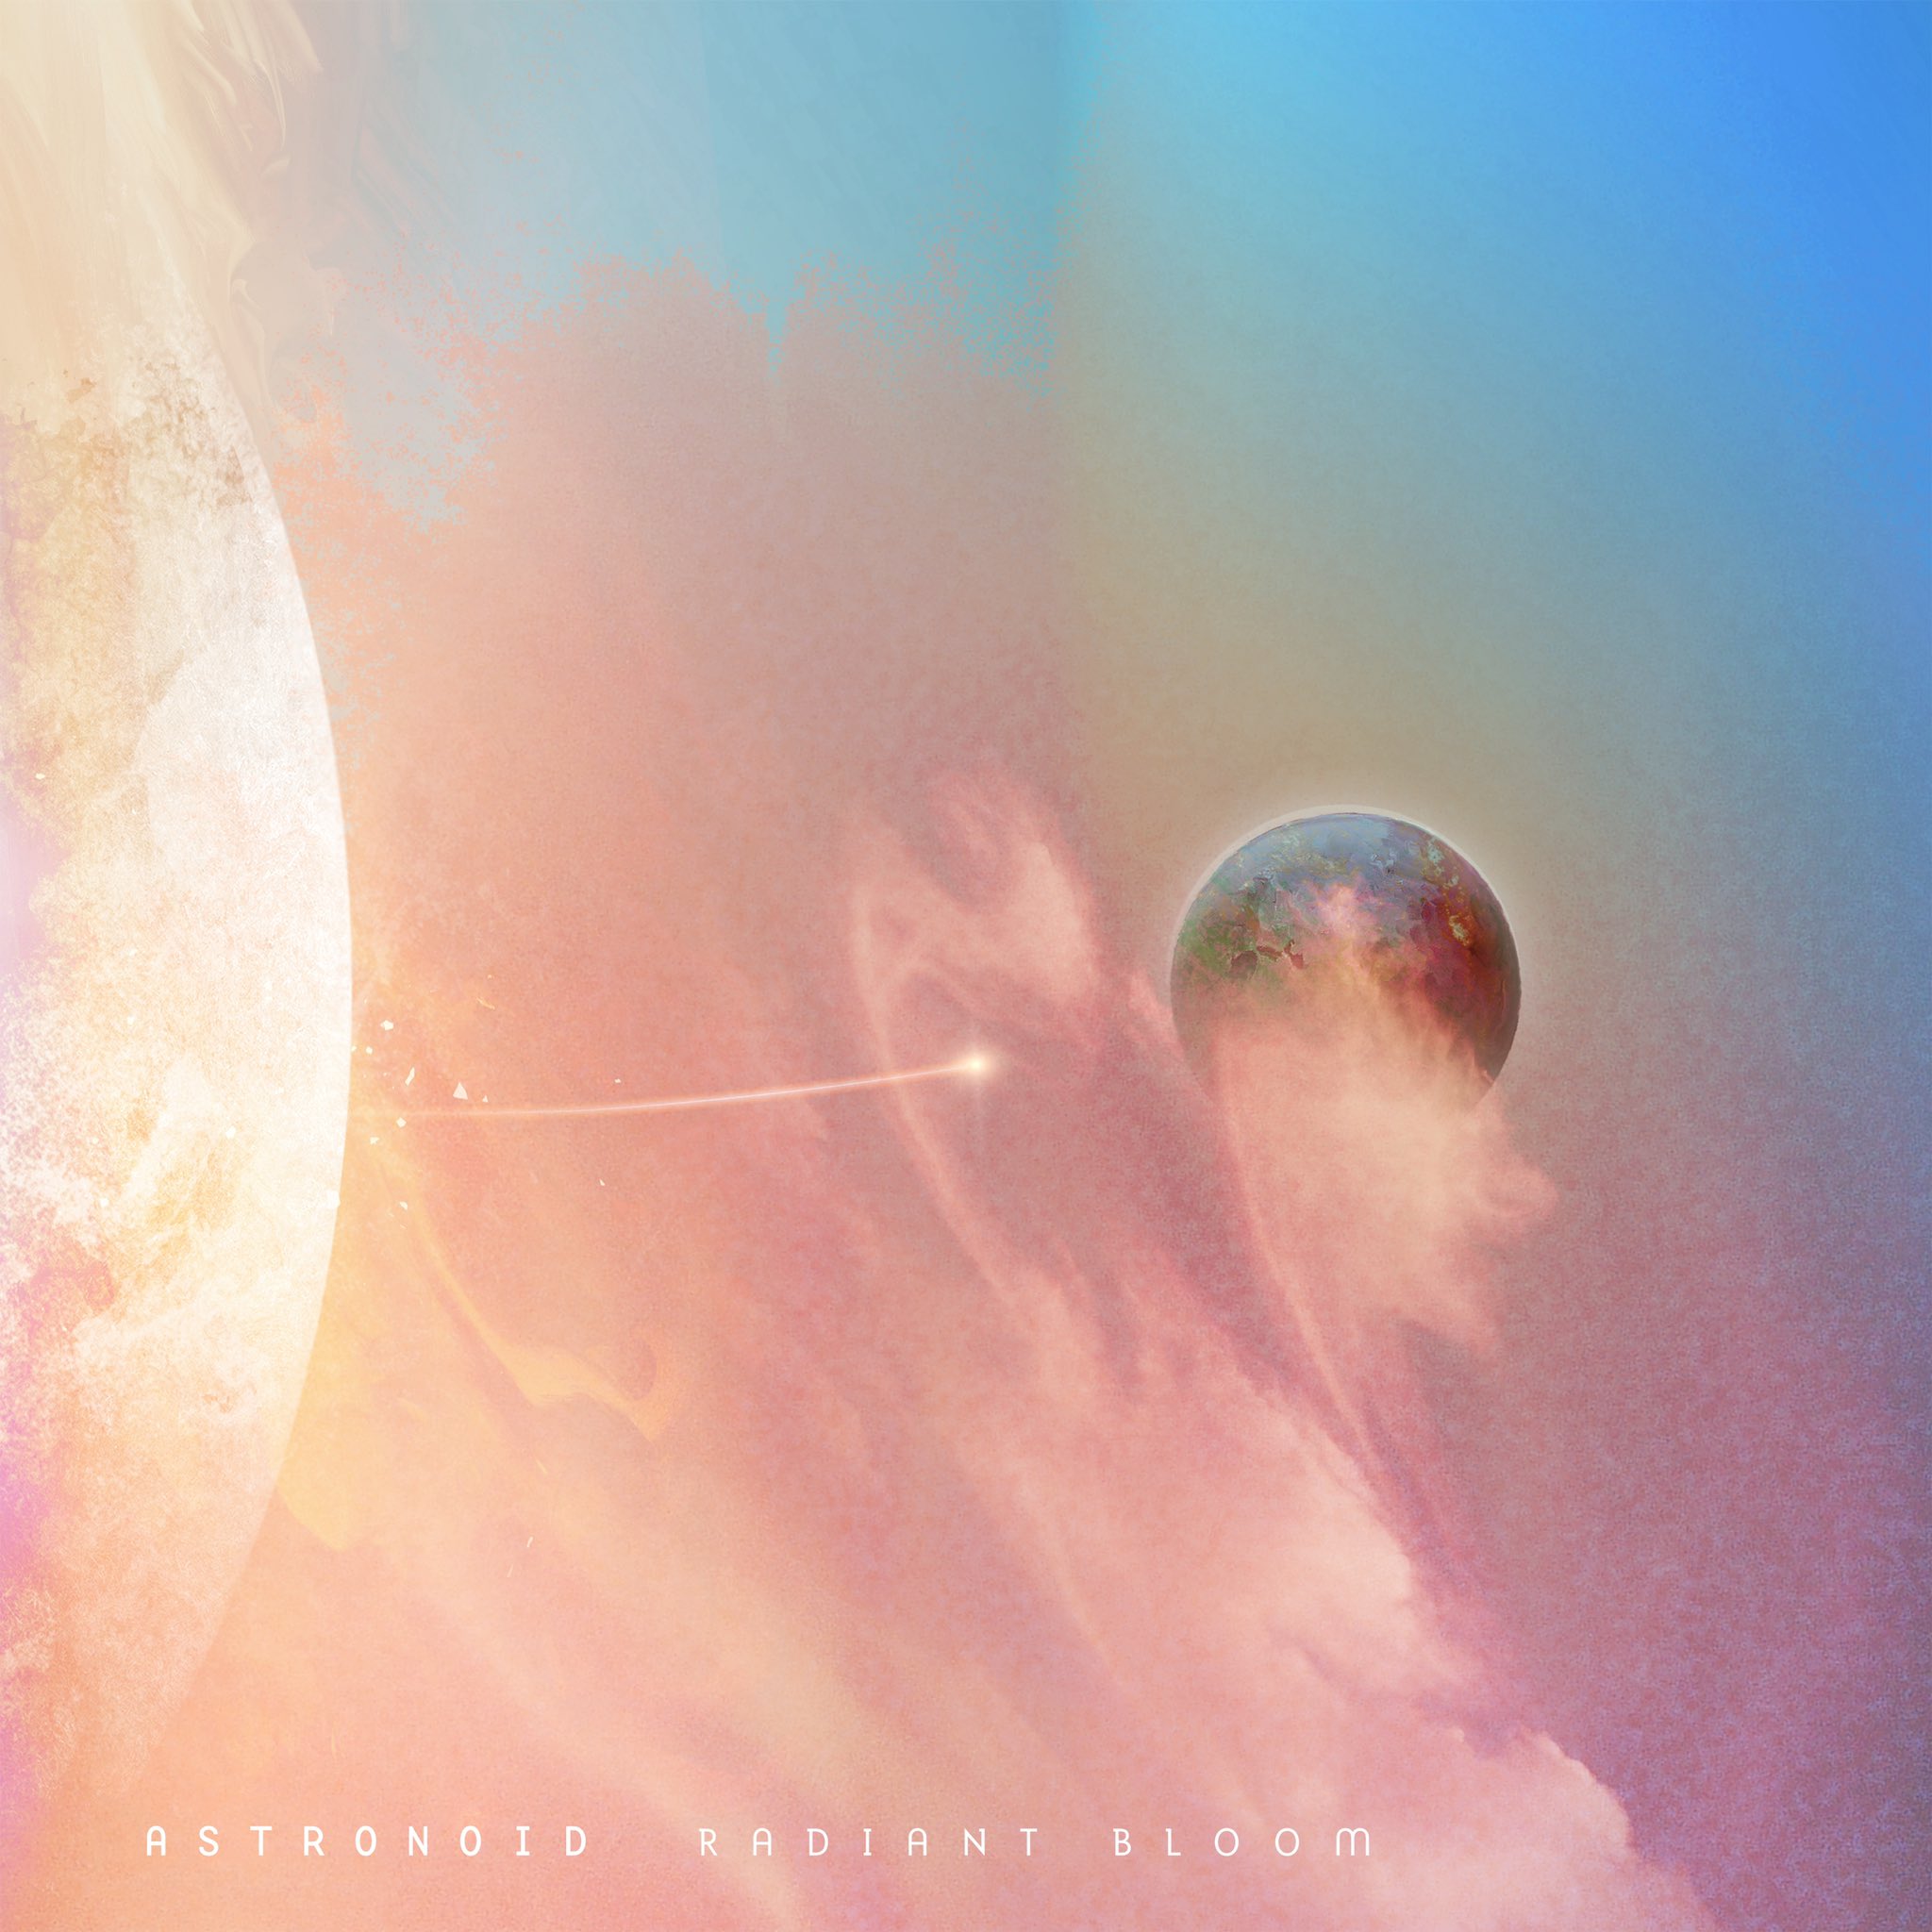 Astronoid Radiant Bloom cover artwork